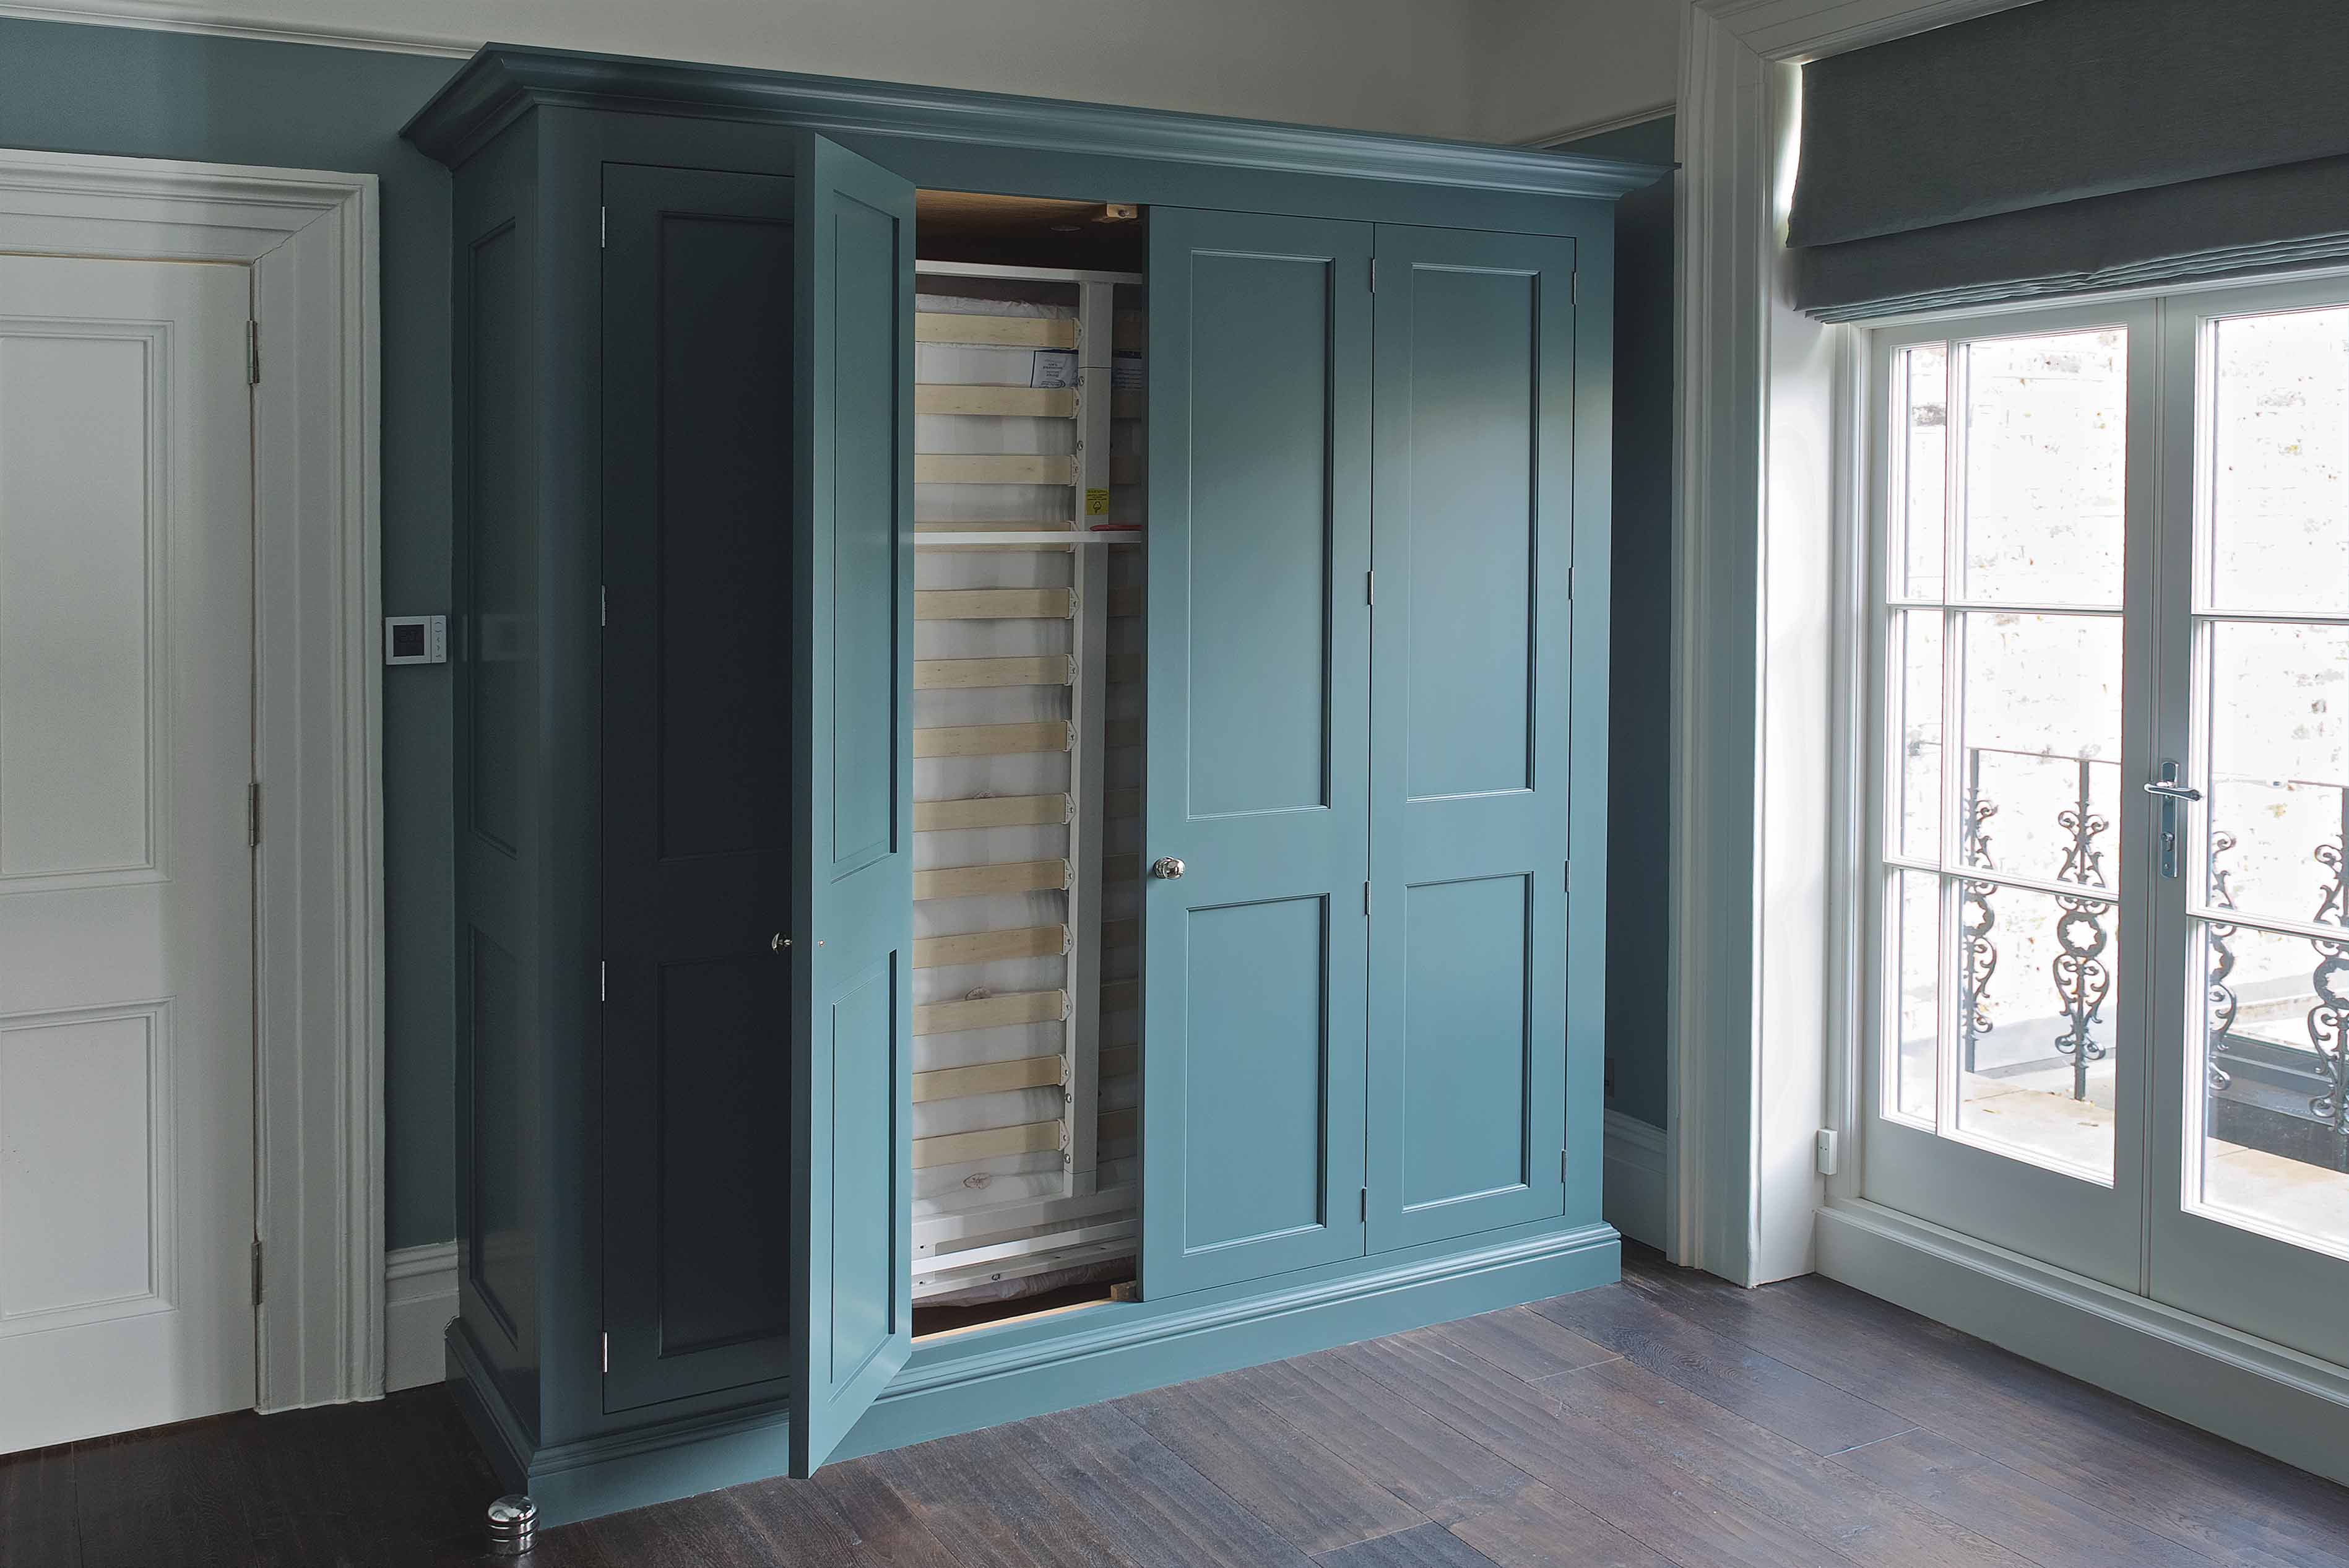 002. Bespoke fitted wardrobes spare guest fold away wall bed cabinet hidden mylands farrow and ball armac martin near Fareham Hampshire